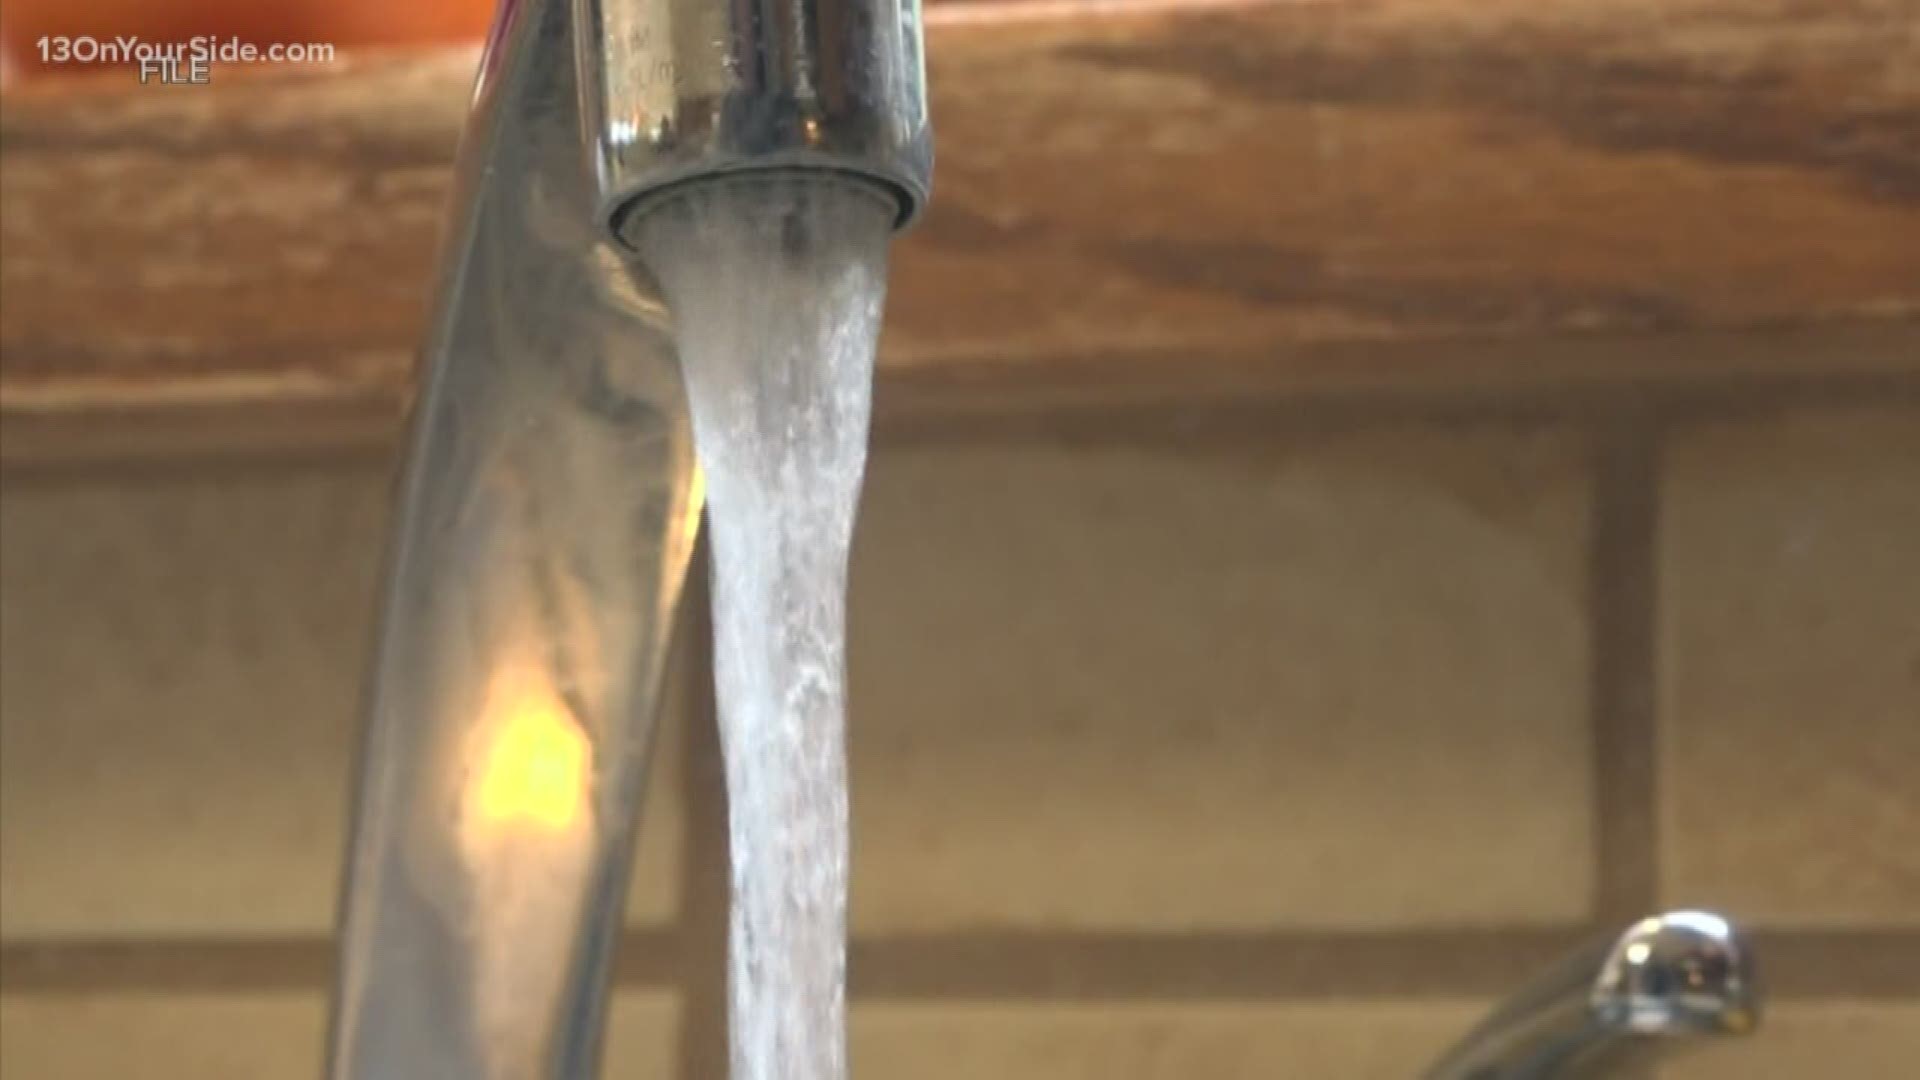 A Michigan panel is preparing to consider proposed limits on some nonstick, water-resistant chemicals in drinking water.